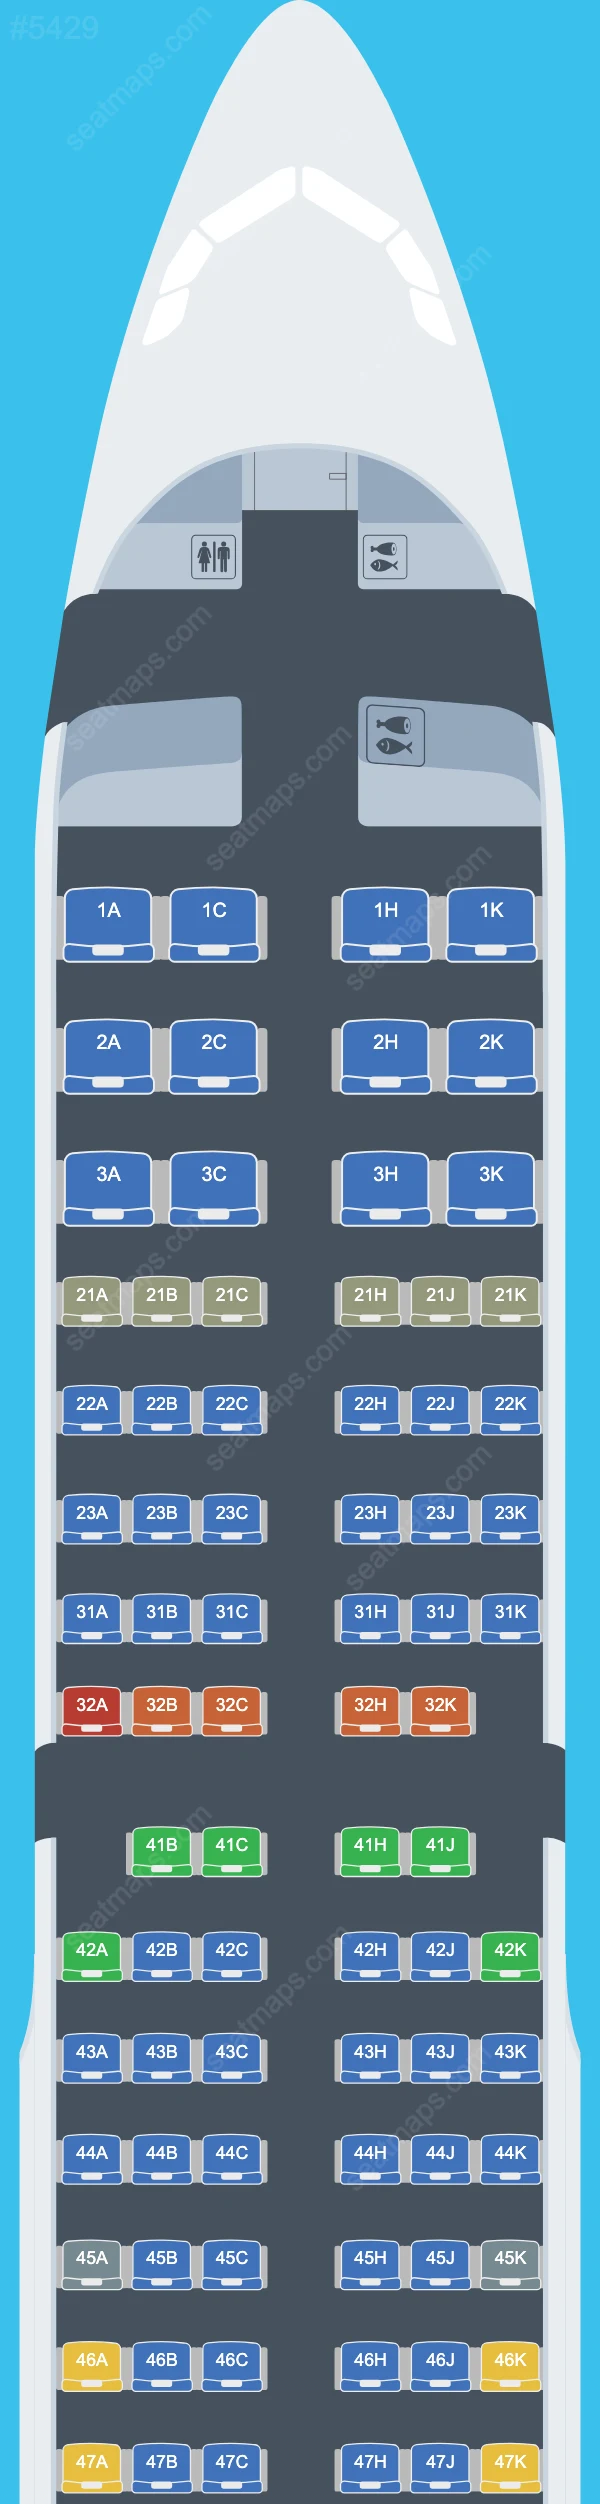 Philippine Airlines (PAL) Airbus A321 Seat Maps A321-200